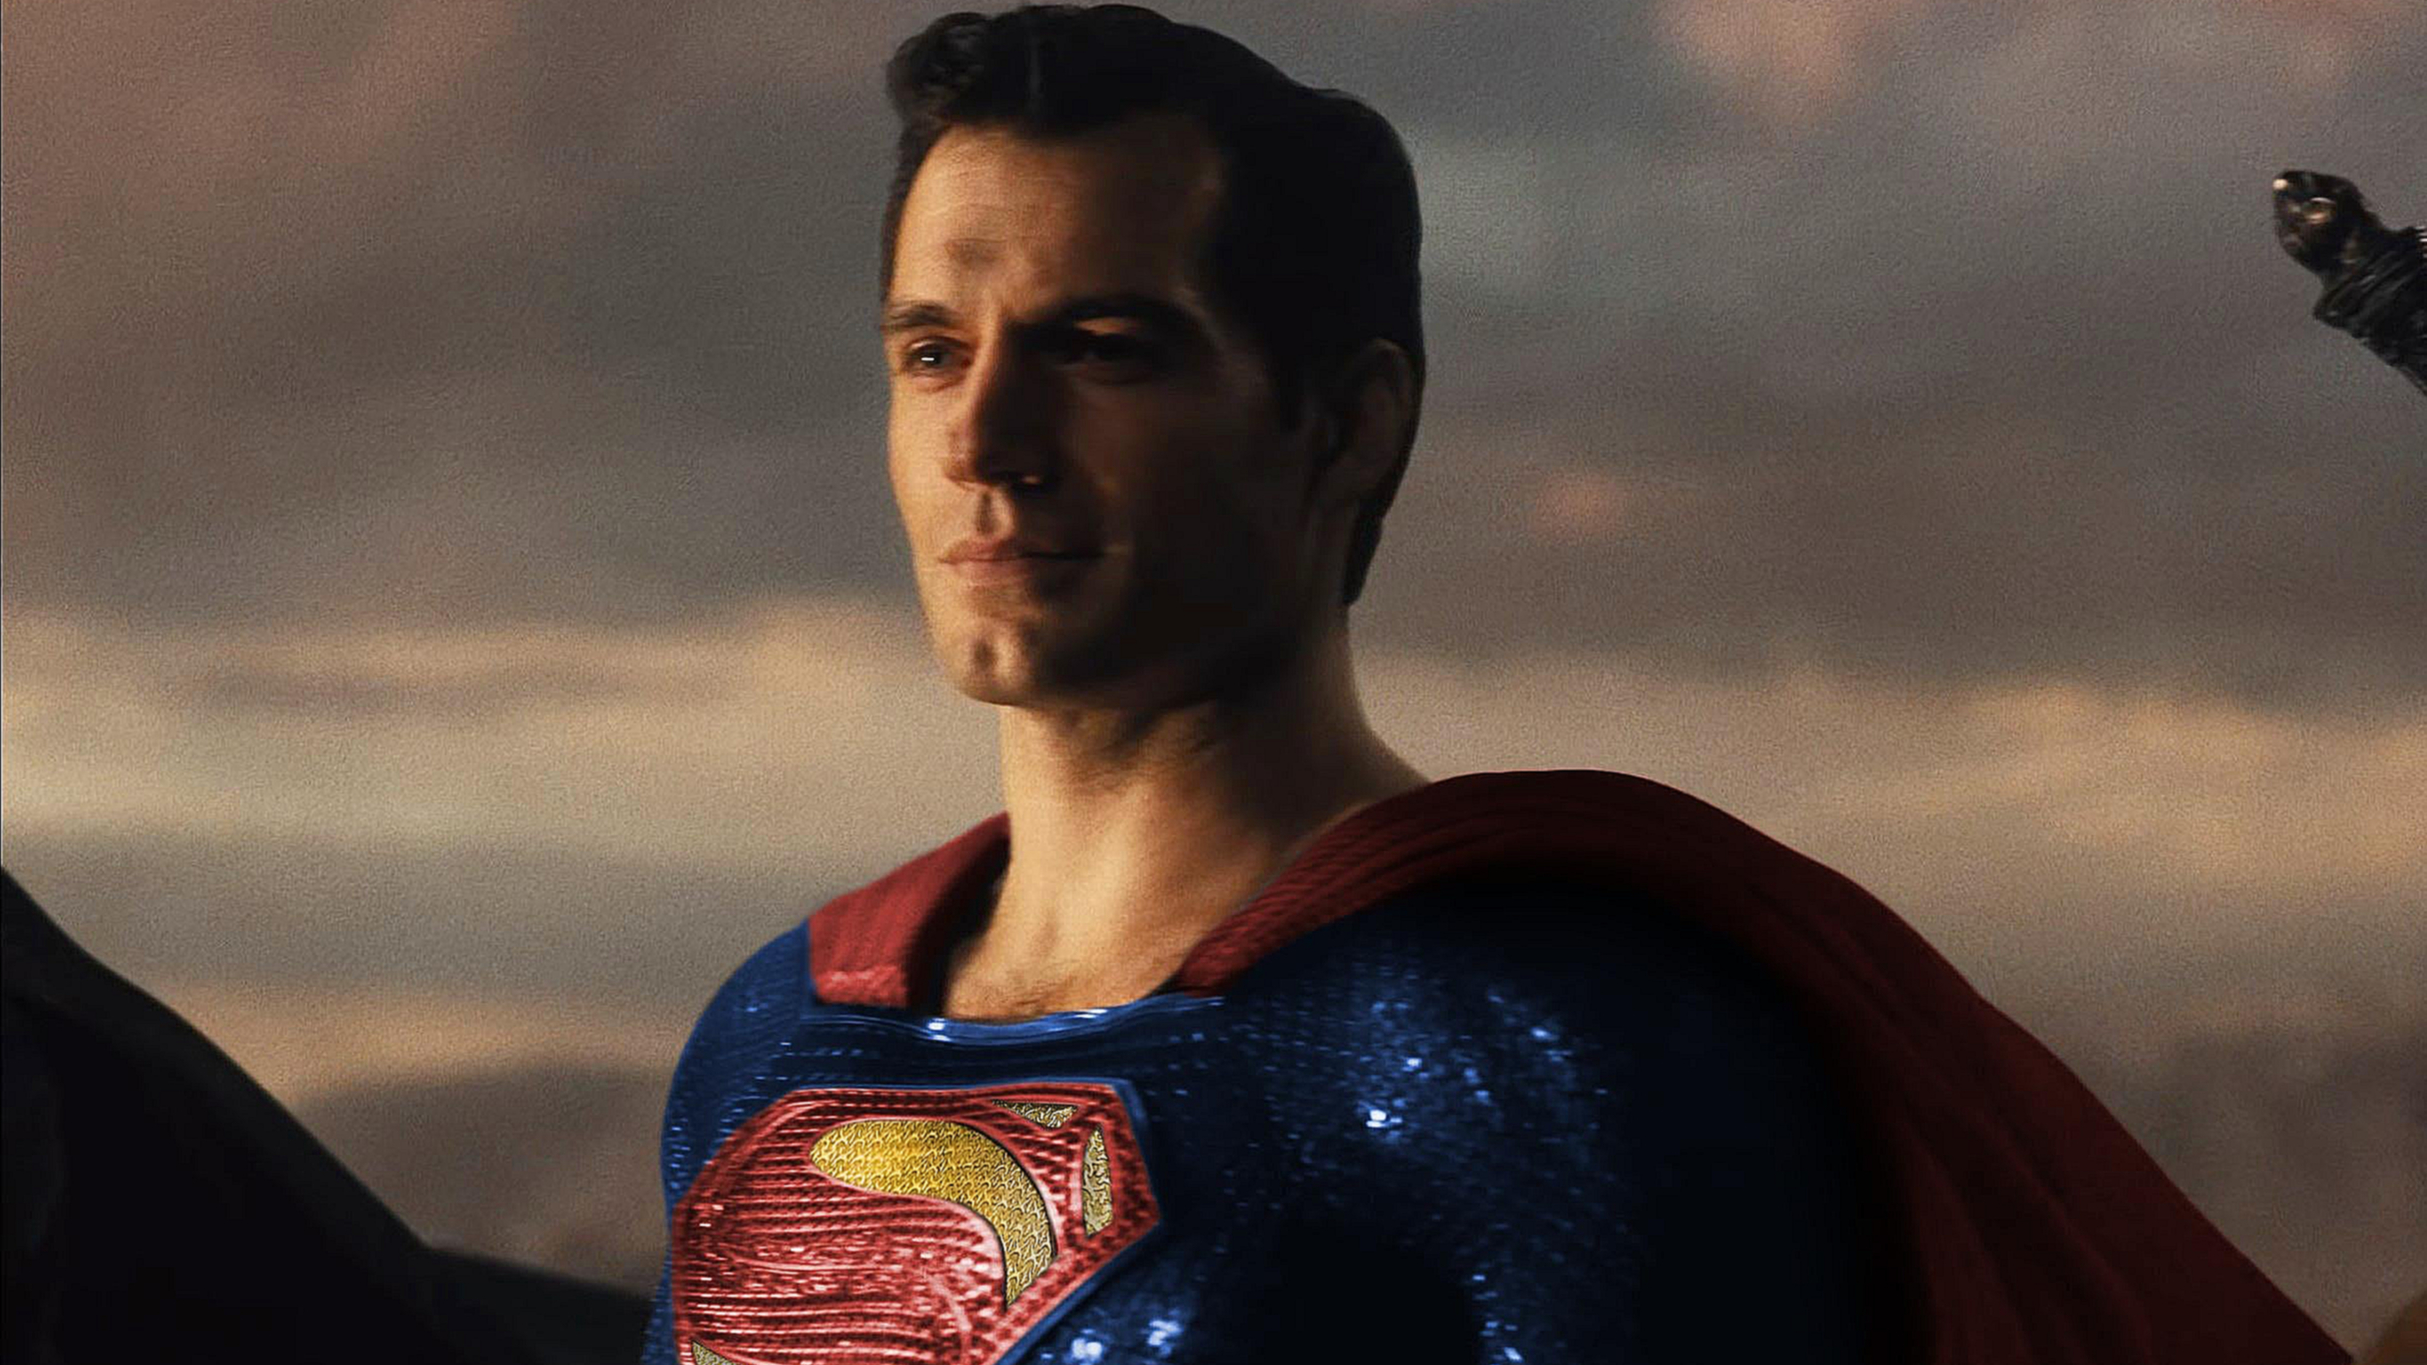 Henry Cavill's Superman Return Is Reportedly Just A Cameo & He's Still Not  Signed For 'Man Of Steel 2